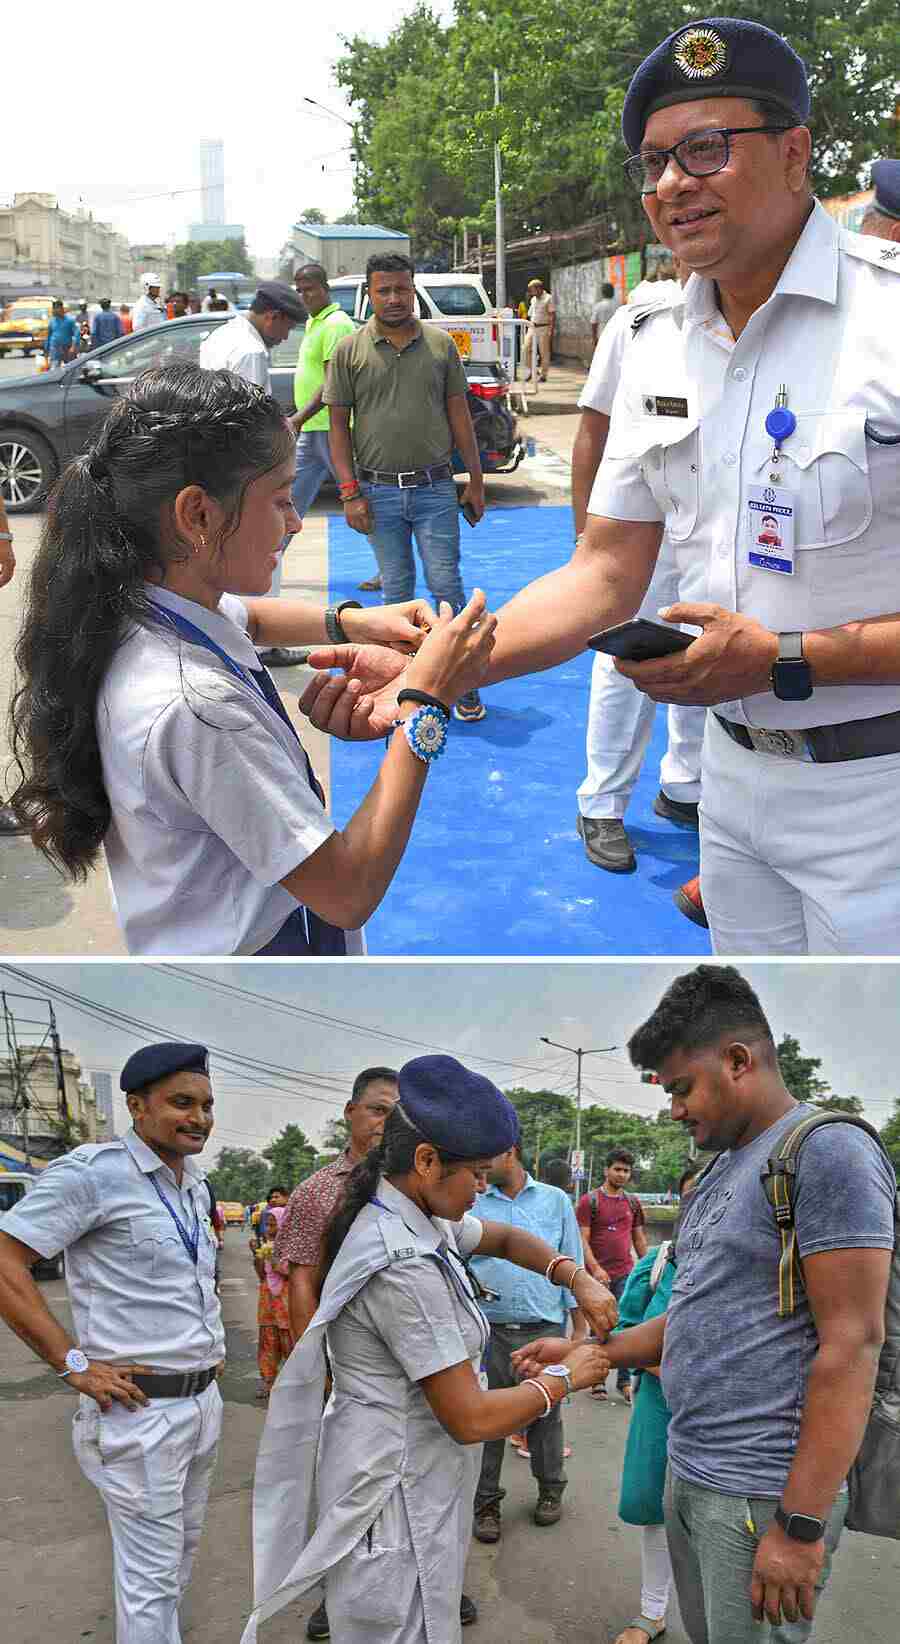 Kolkata Police and Kolkata Traffic Police also celebrated Rakhi Purnima on the city streets. Pedestrians tied rakhis on the police personnel. Women members of the force also tied rakhis on passers-by   